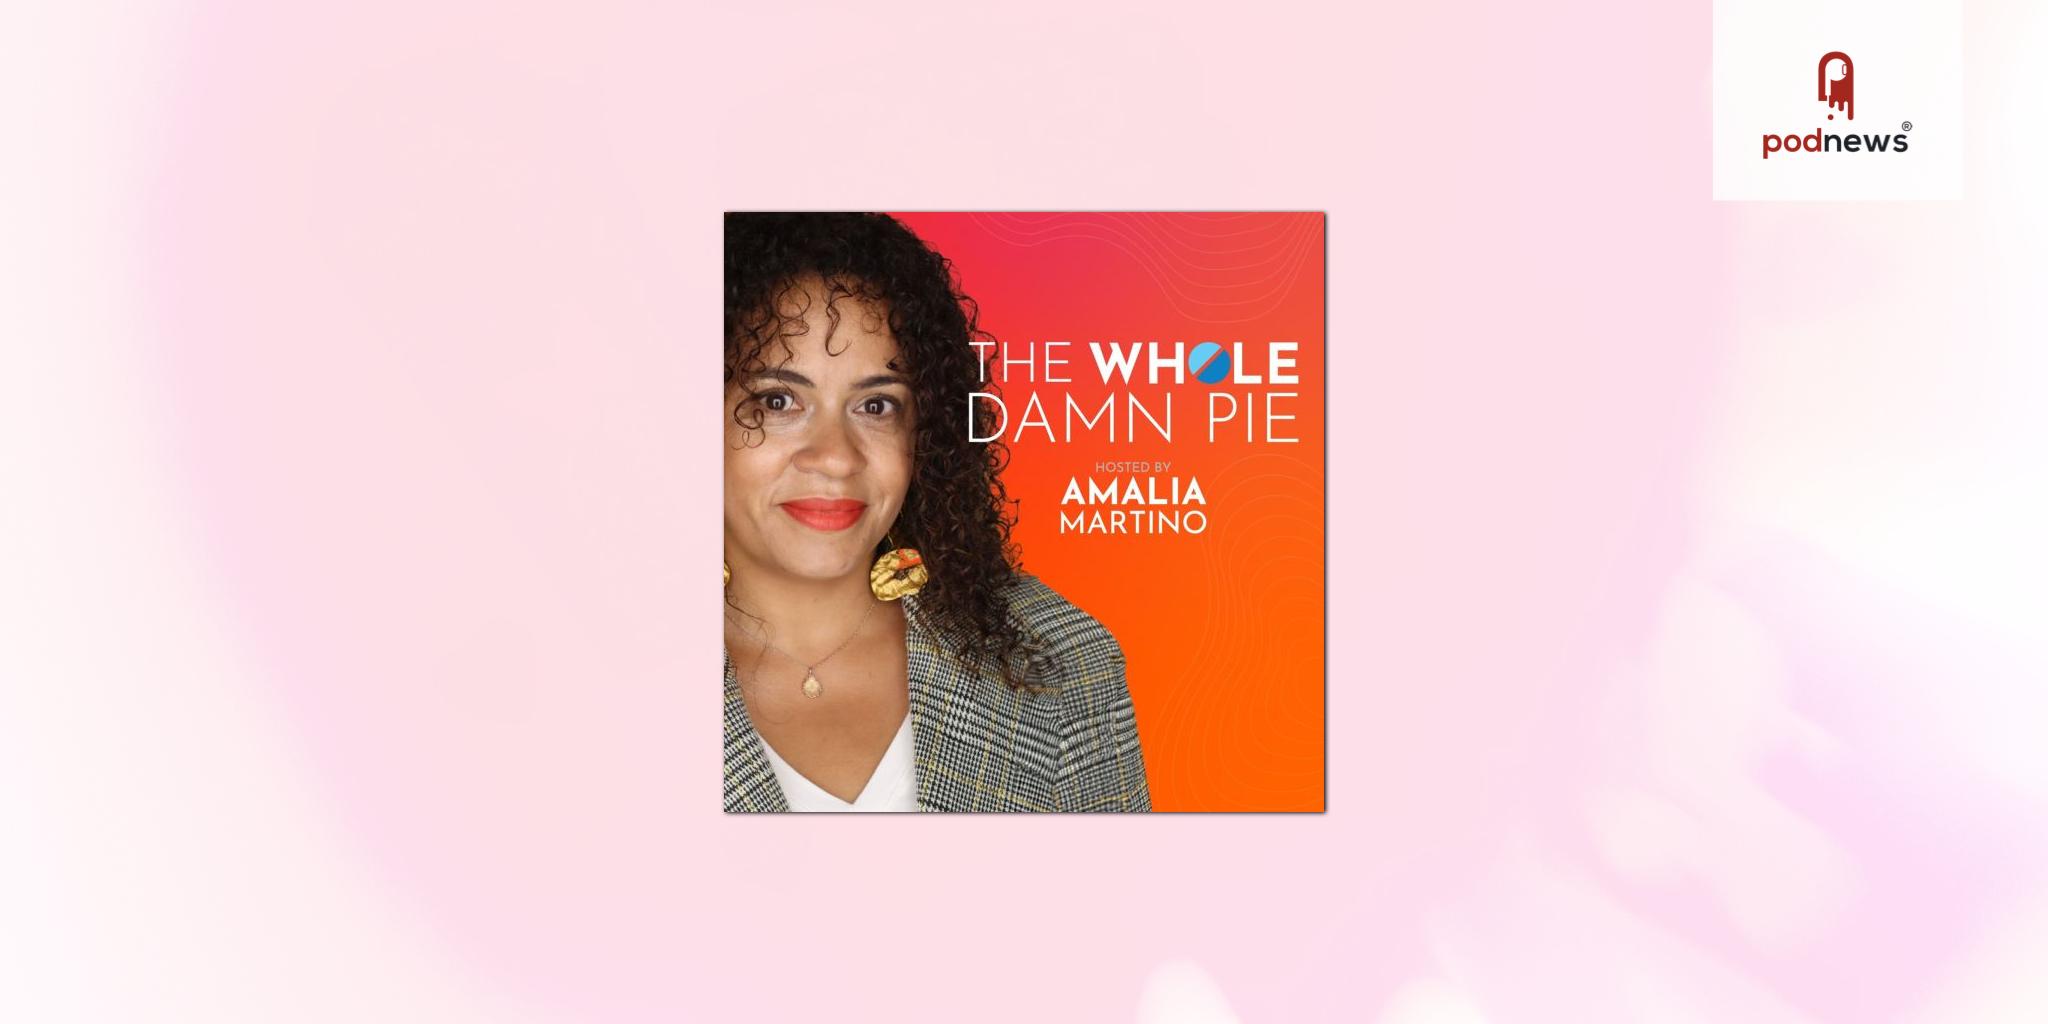 Amalia Martino Serves Up The Whole Damn Pie in New Fulfillment-Focused Podcast